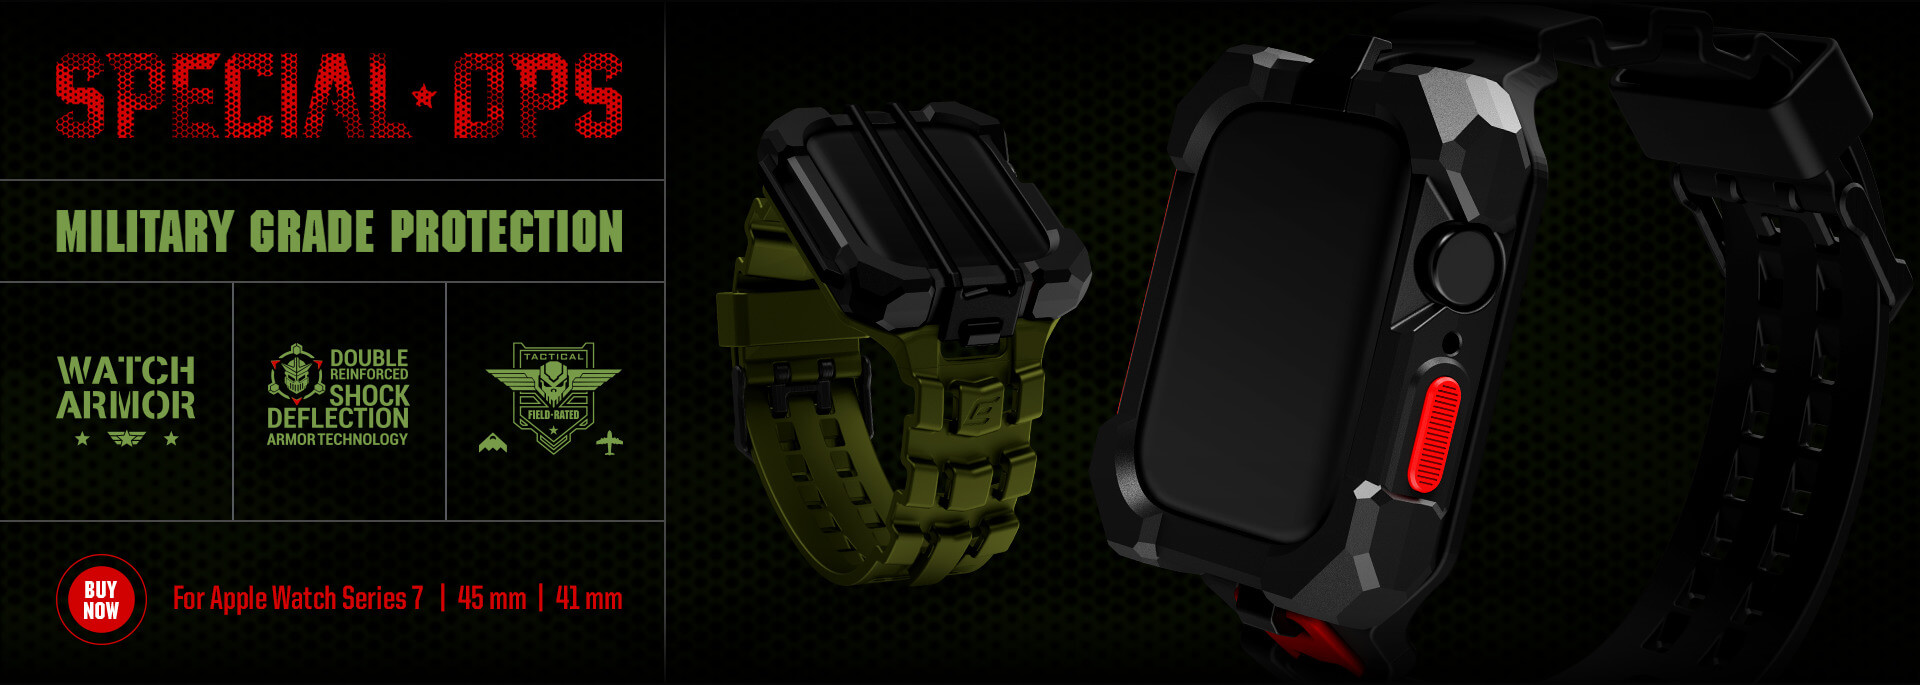 Special Ops Apple Watch Band (Series 7) Homepage Banner CTA